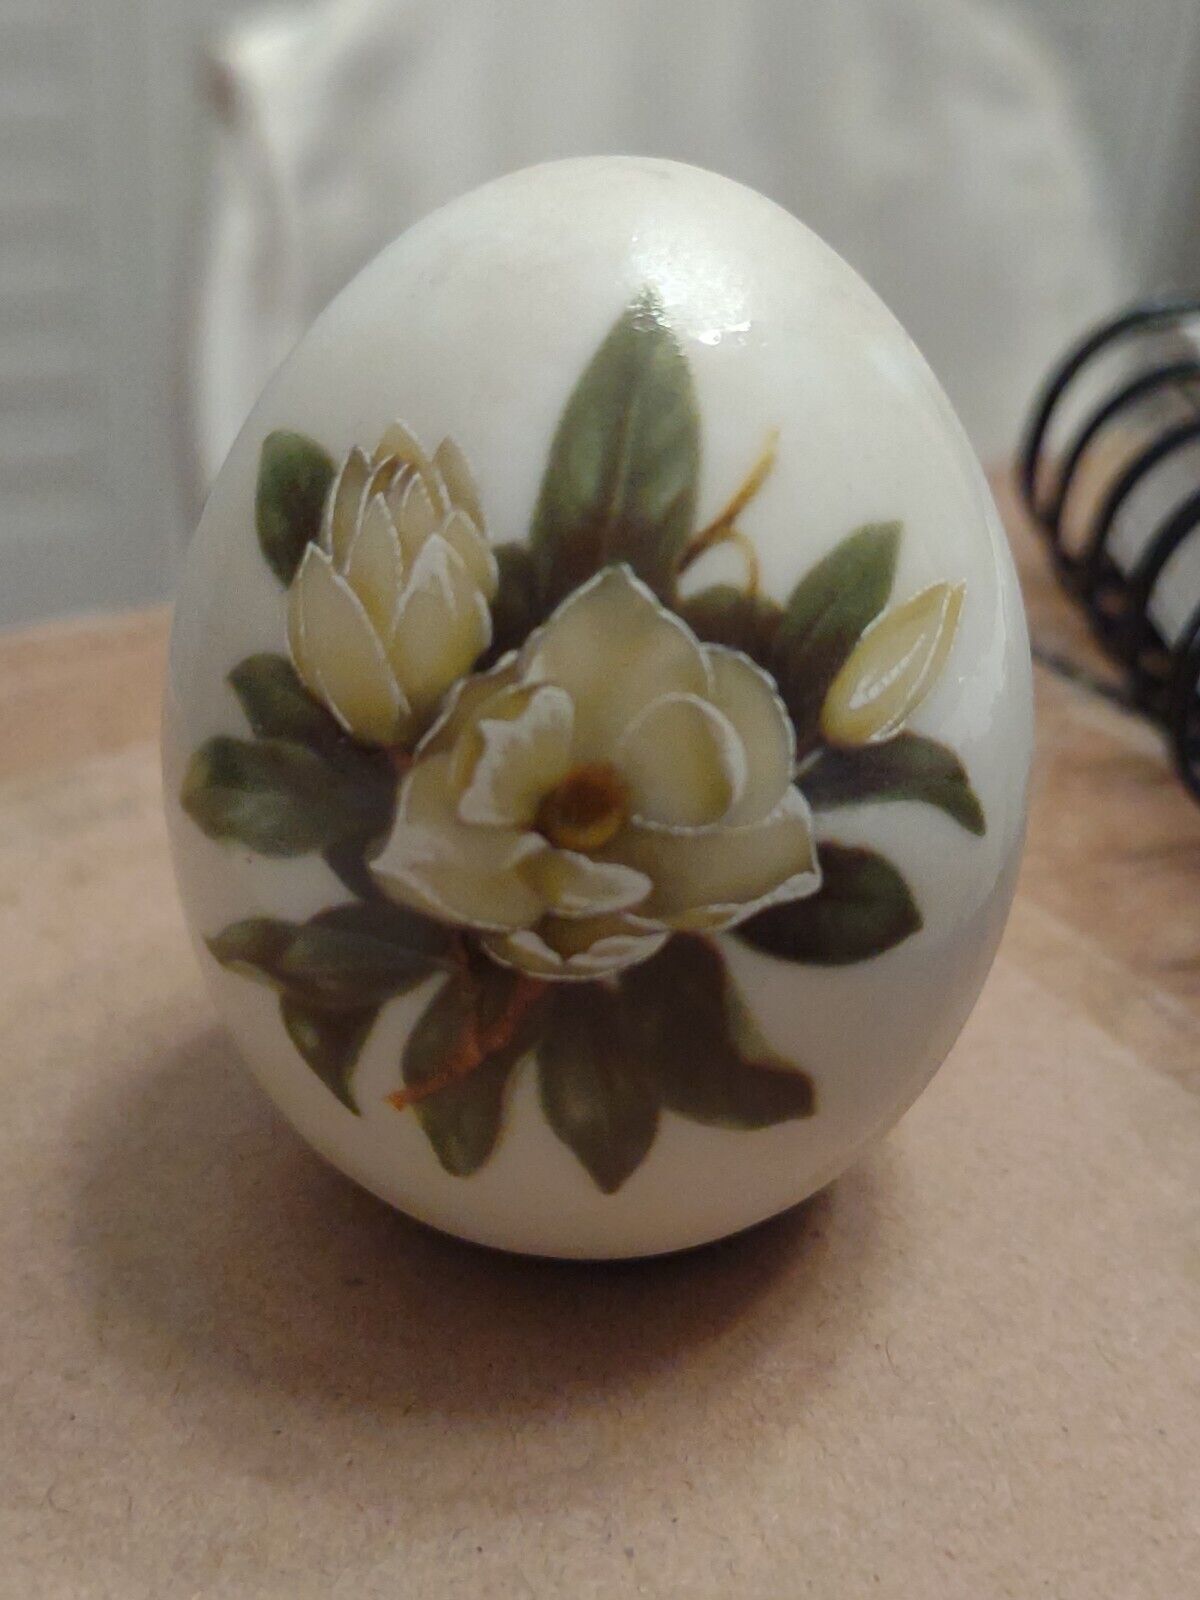 Vintage Porcelain Egg Yellow Roses Hand Crafted Egg Paperweight